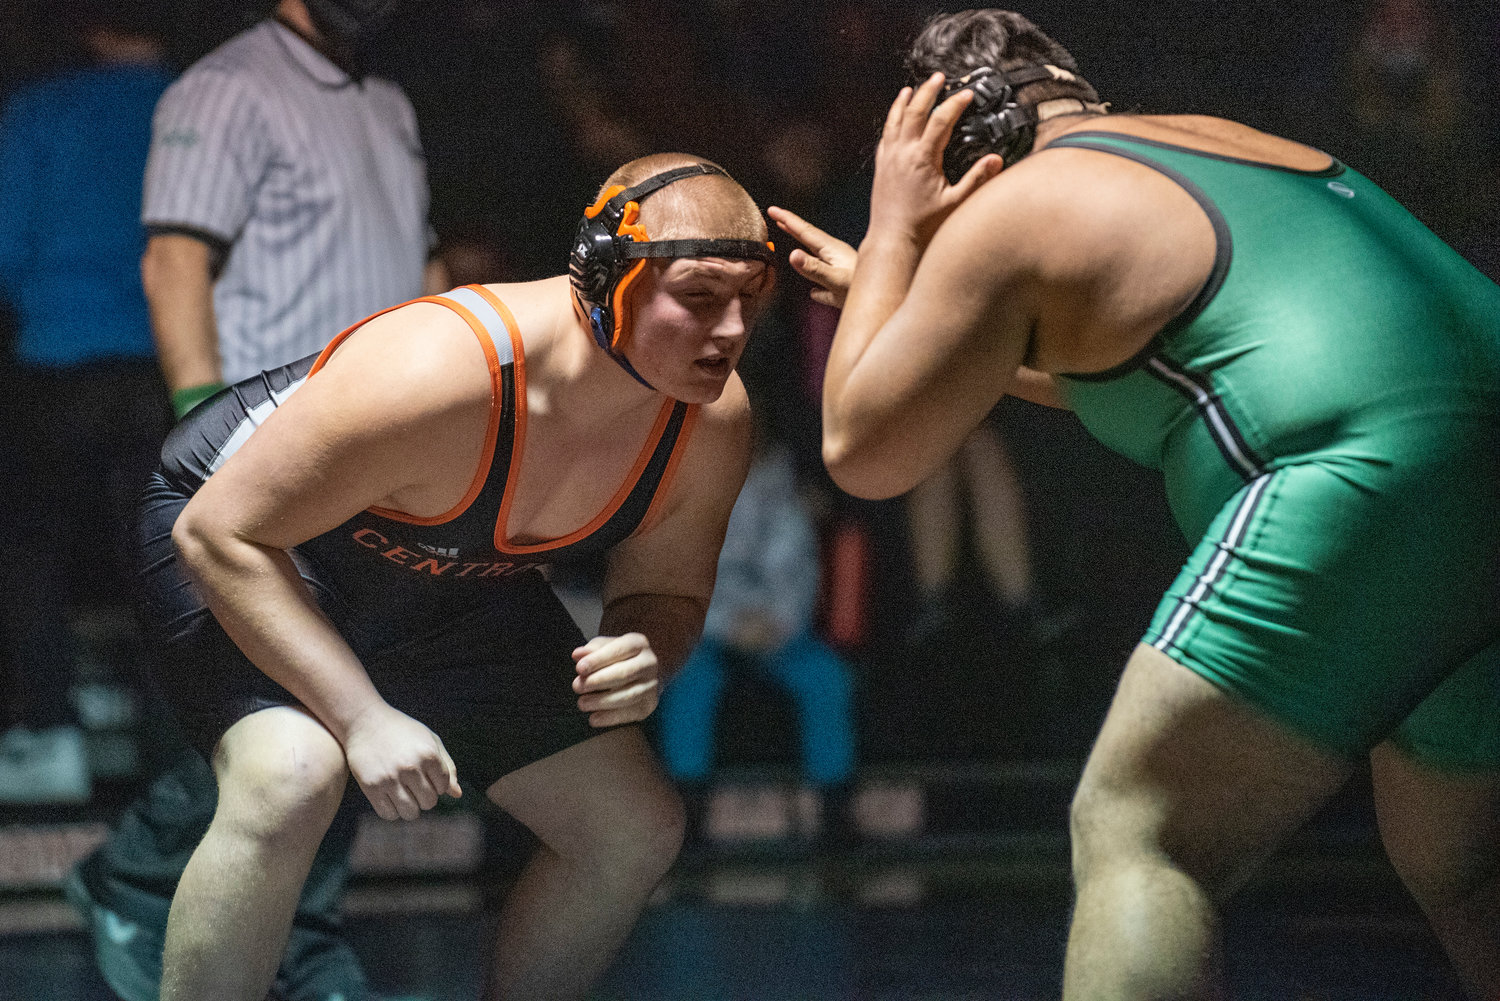 Centralia junior Willy Stinkeoway, left, prepares to tie up with a Tumwater wrestler at 285 pounds on Jan. 5.